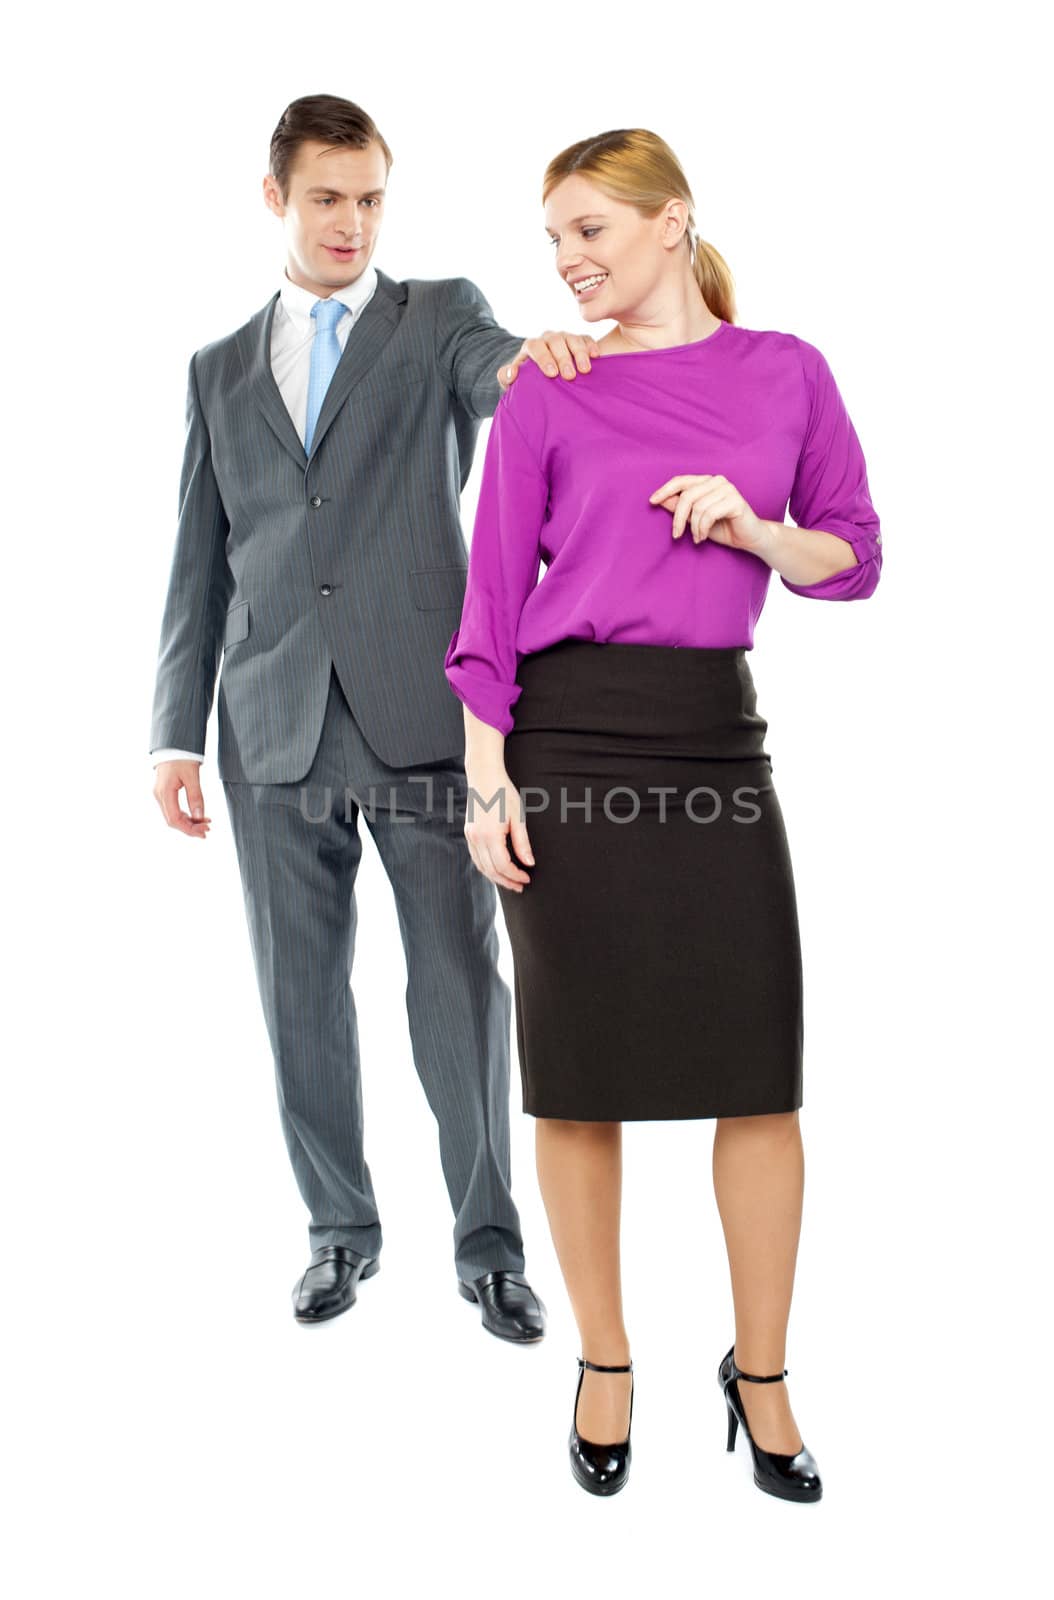 Businessman stopping female secretary to ask her out